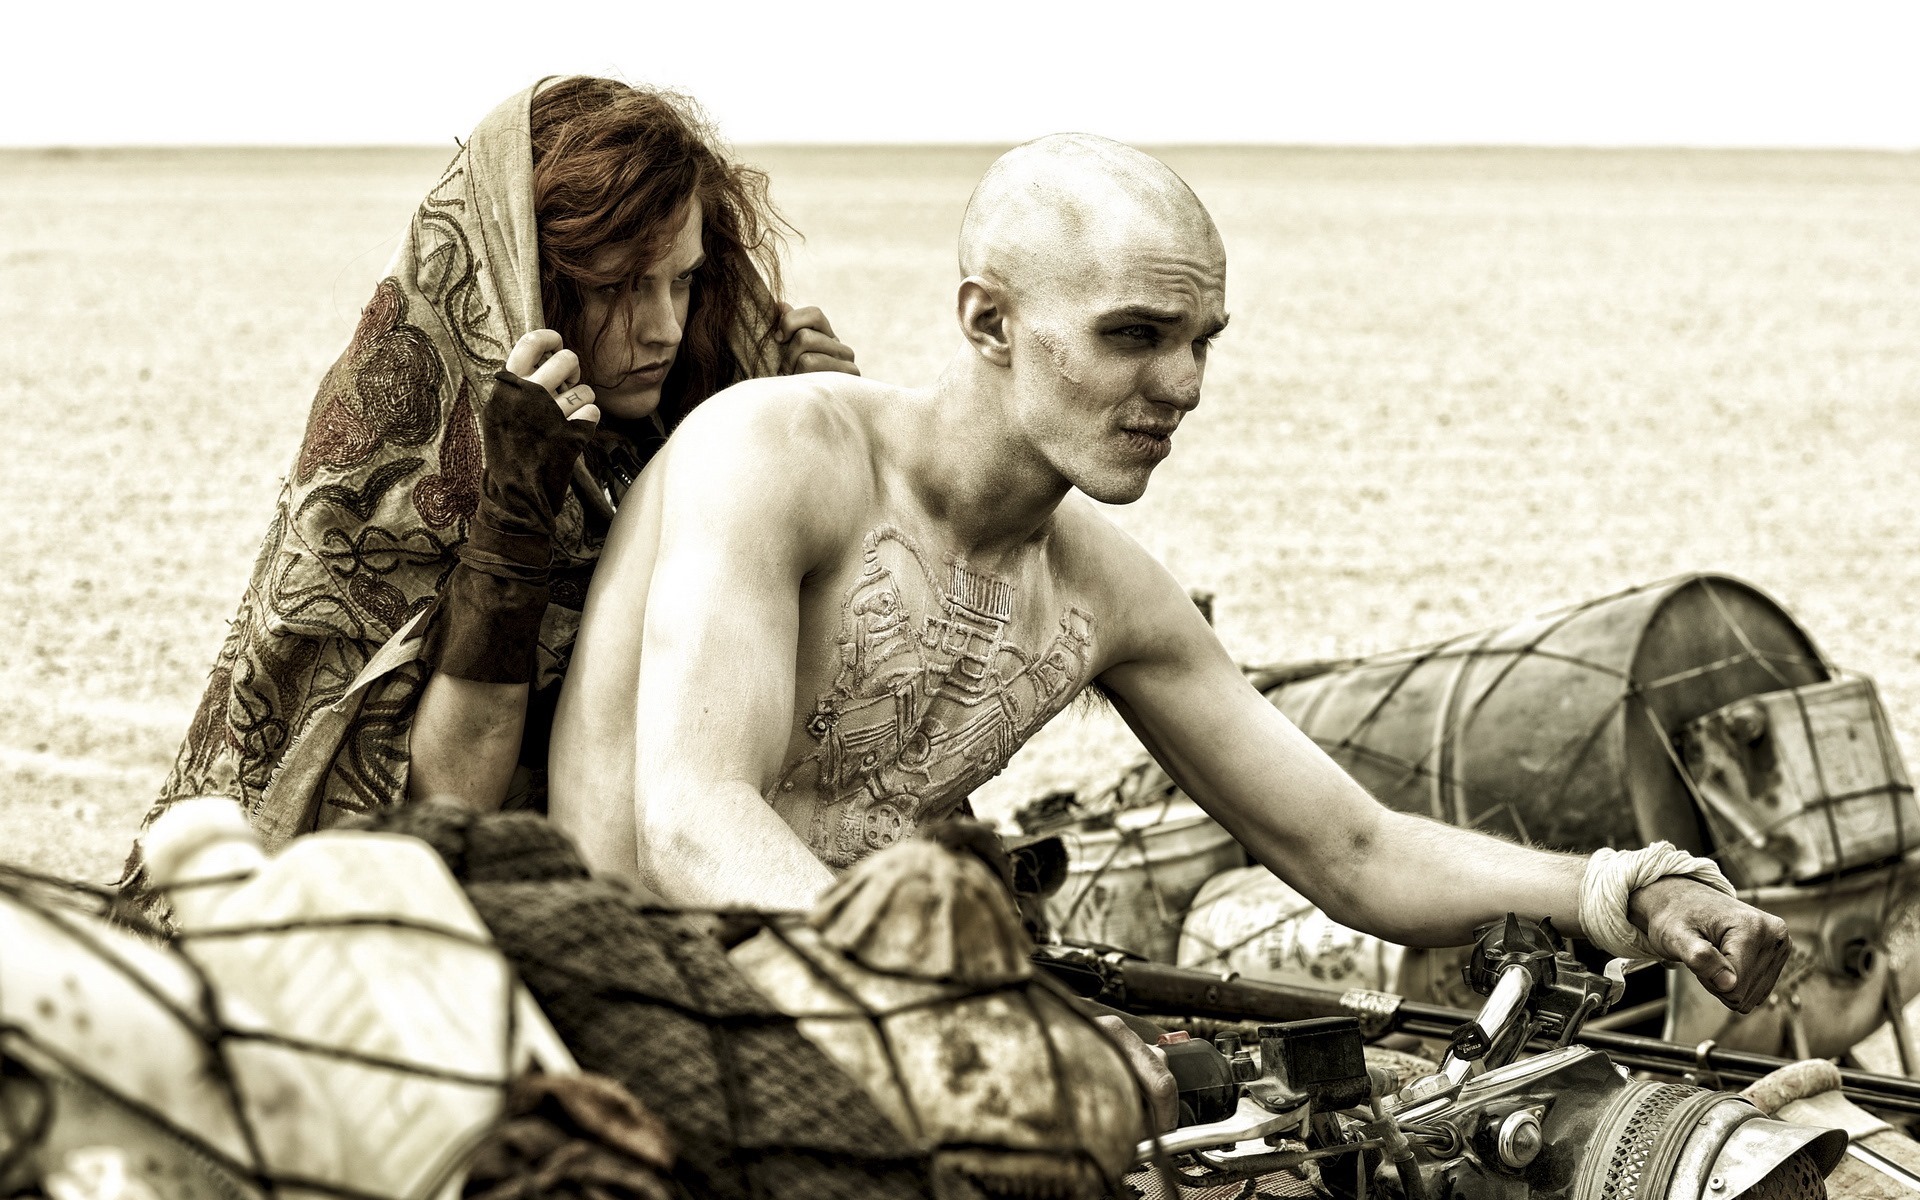 Mad Max: Fury Road, HD movie wallpapers #13 - 1920x1200